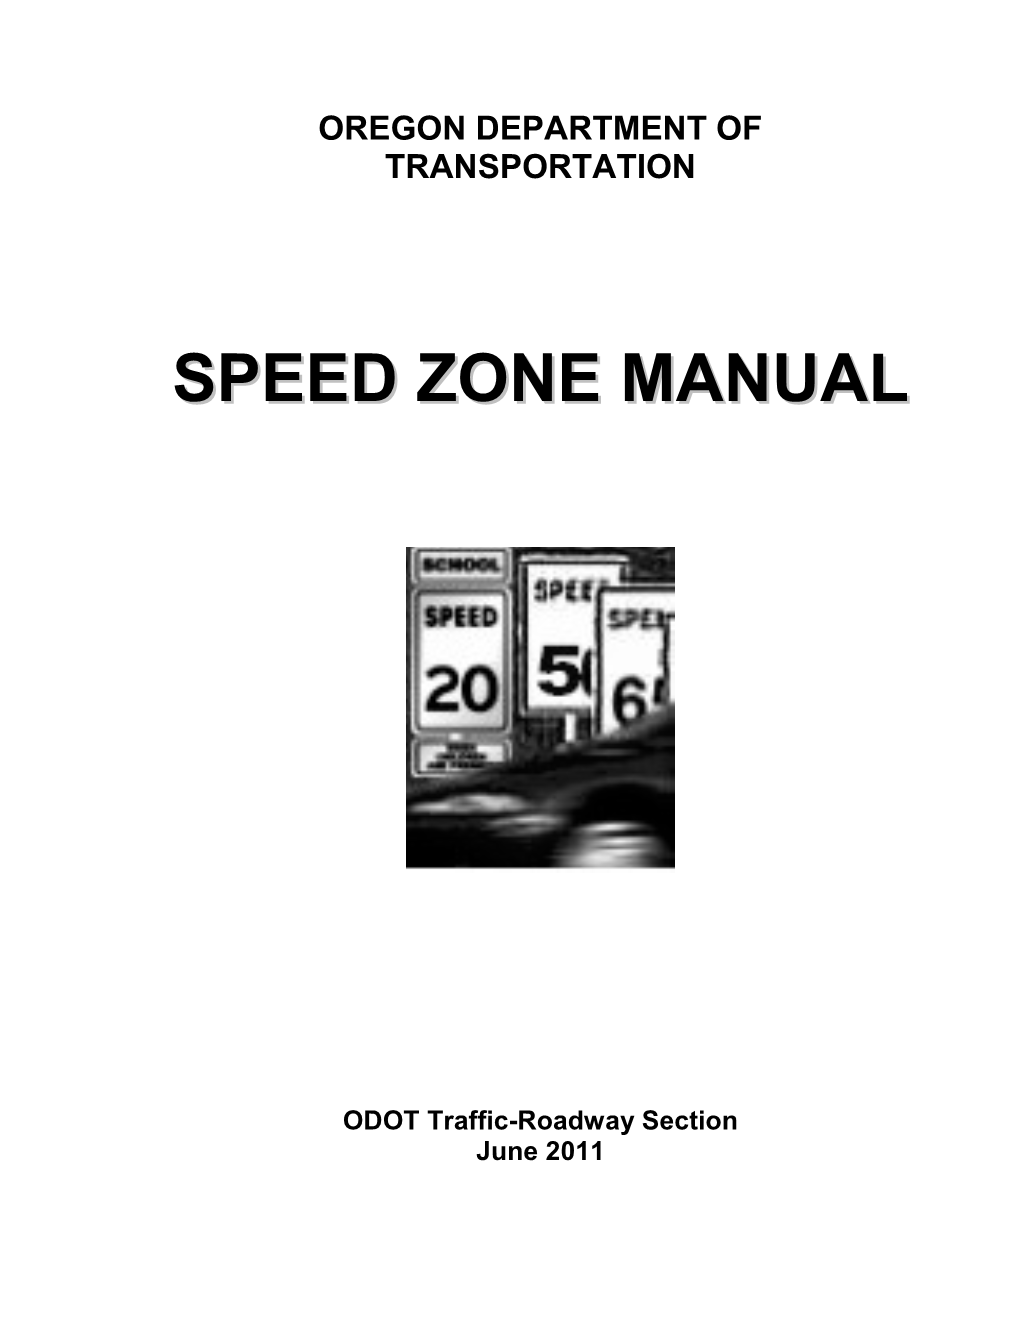 ODOT Speed Limit Rules